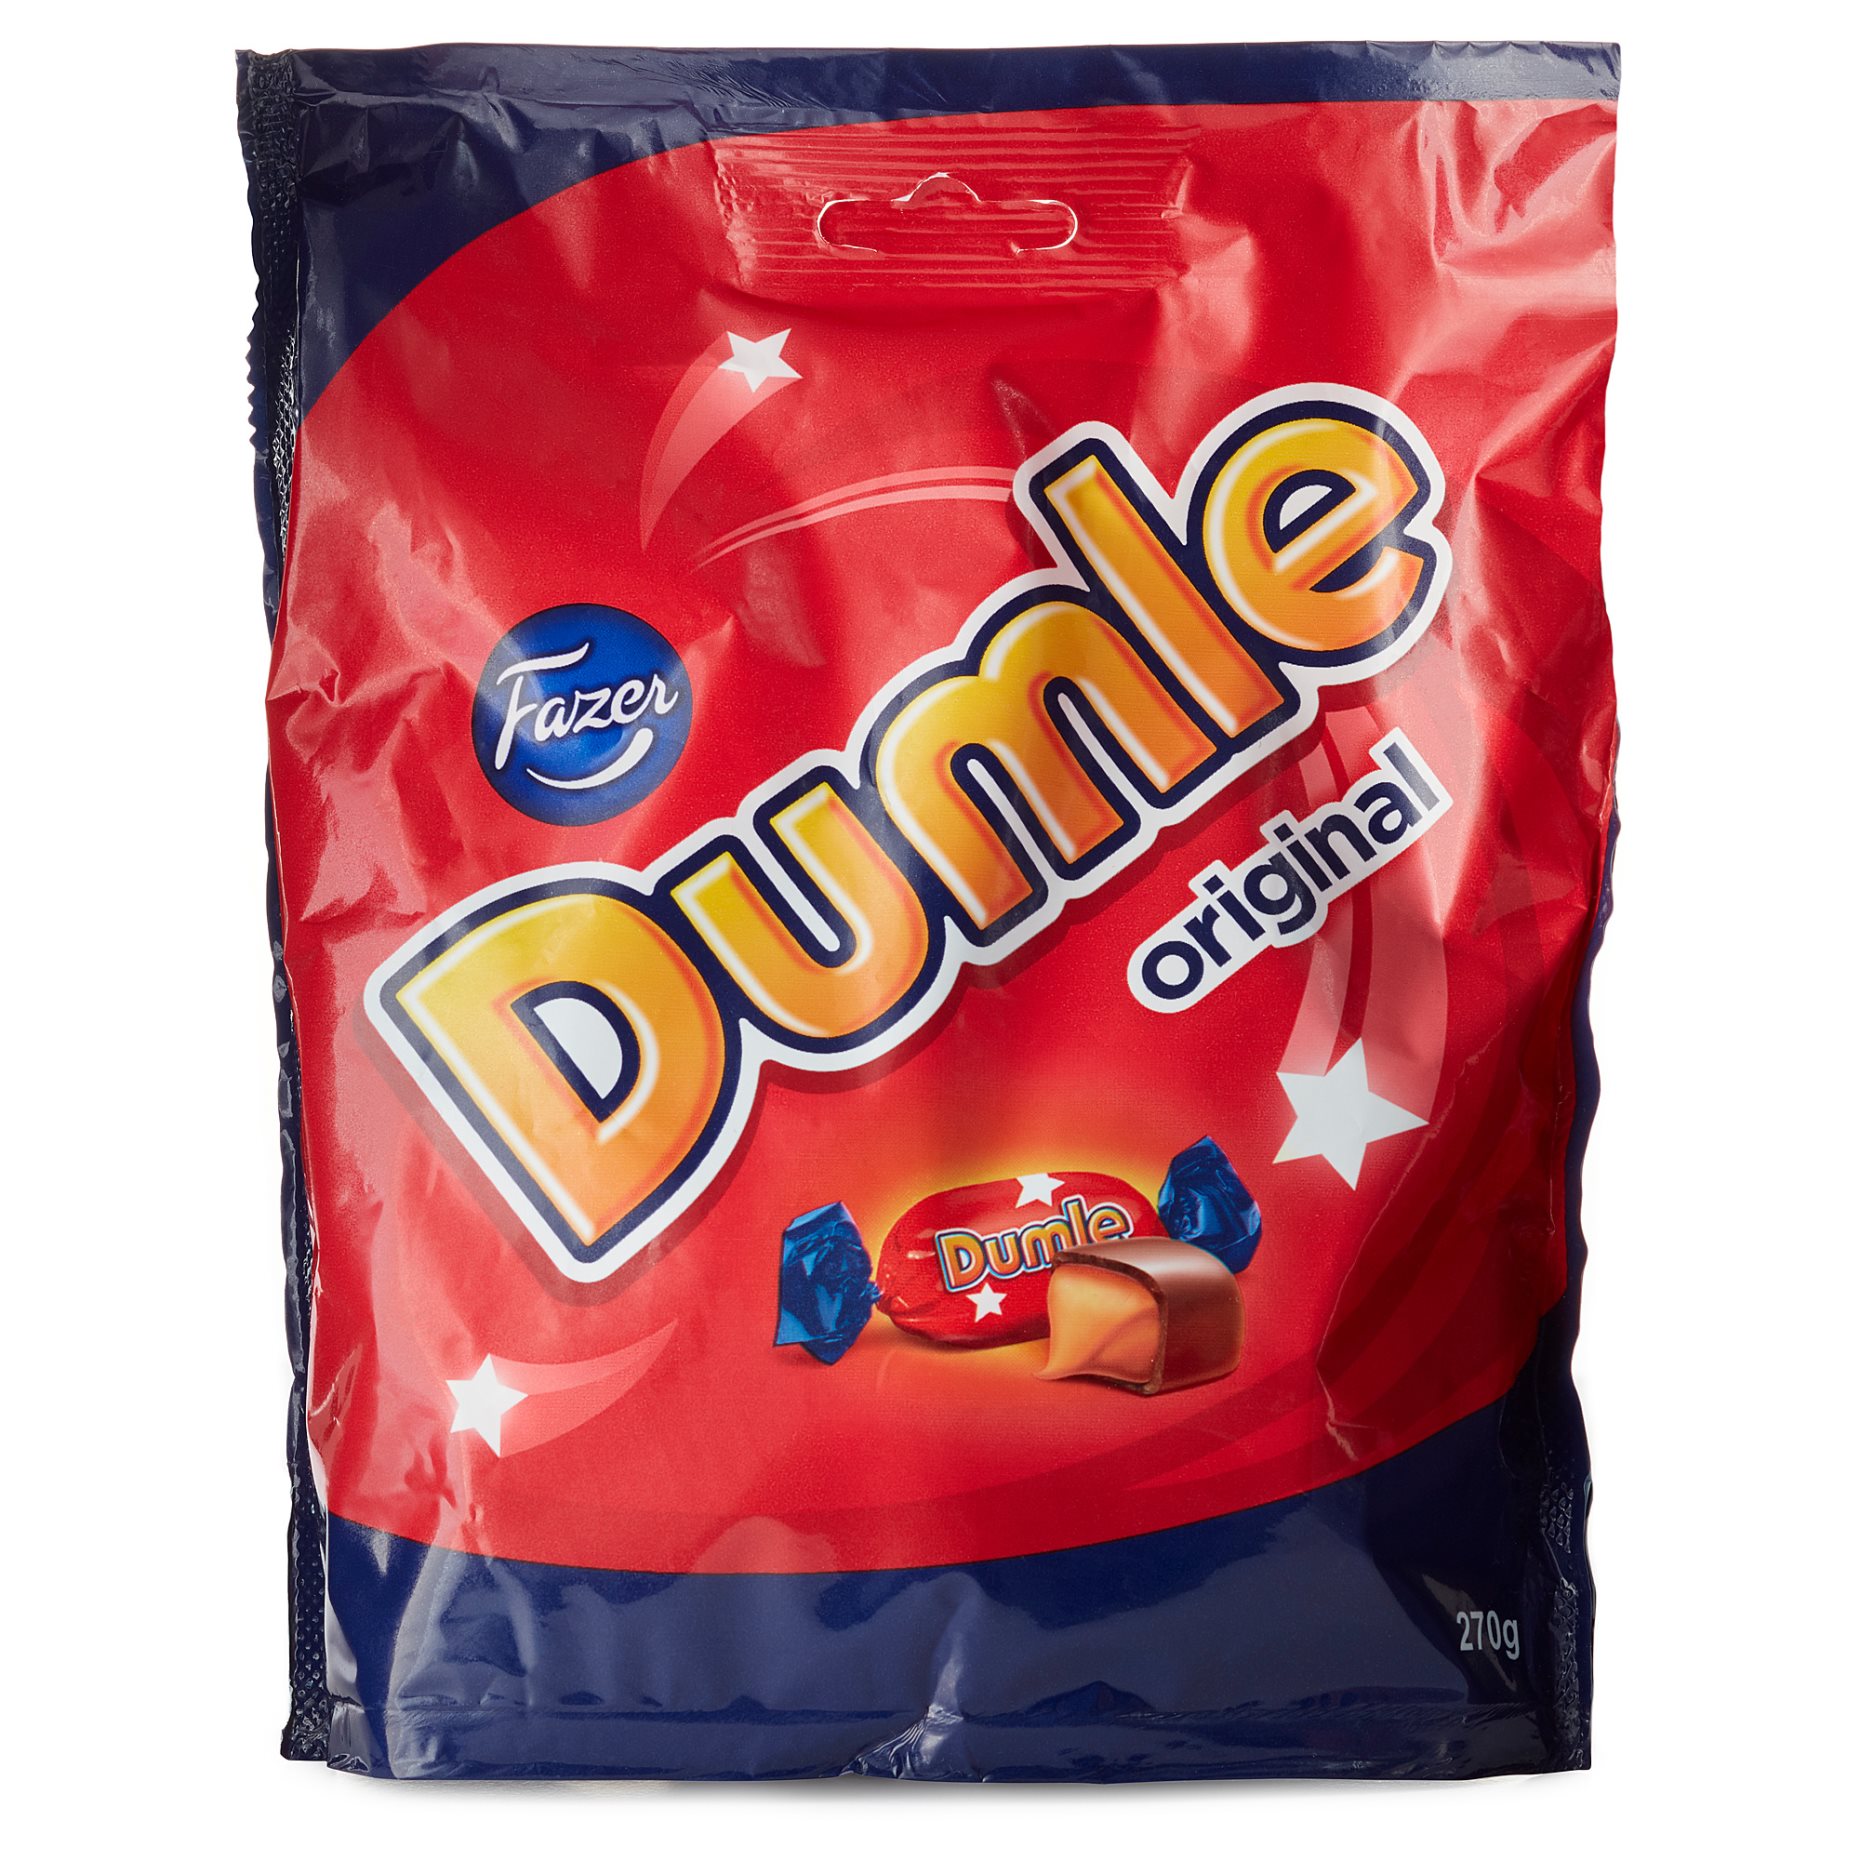 DUMLE, chocolate covered toffees, 270 g, 603.928.54